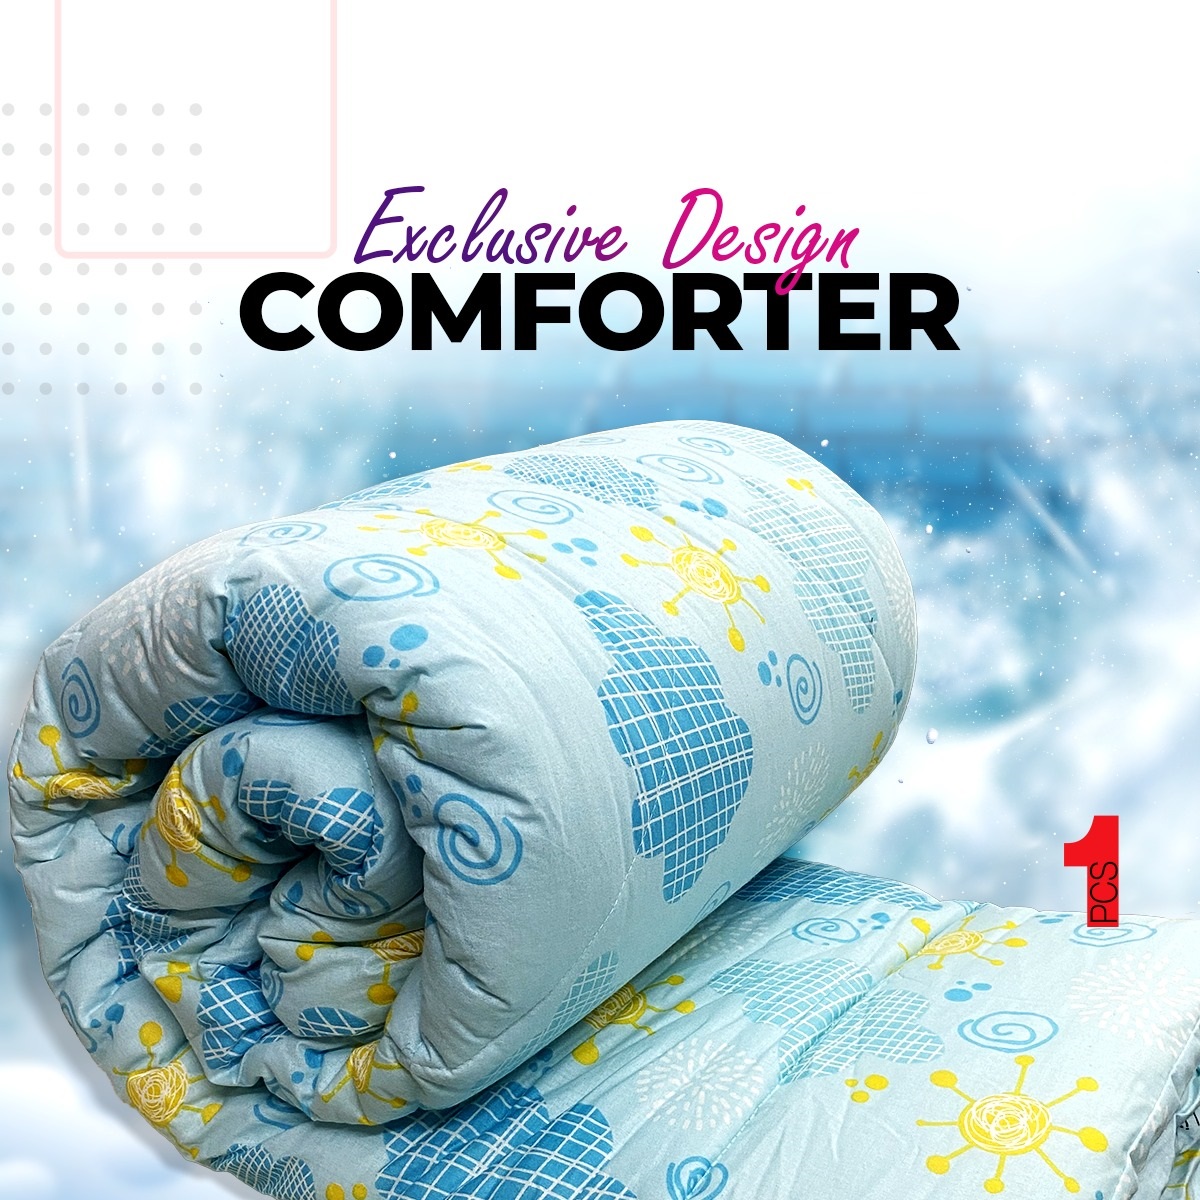 King Size Comforter Cotton Outside Fiber Filler Inside Too Warmth Perfect For Winter - LC006